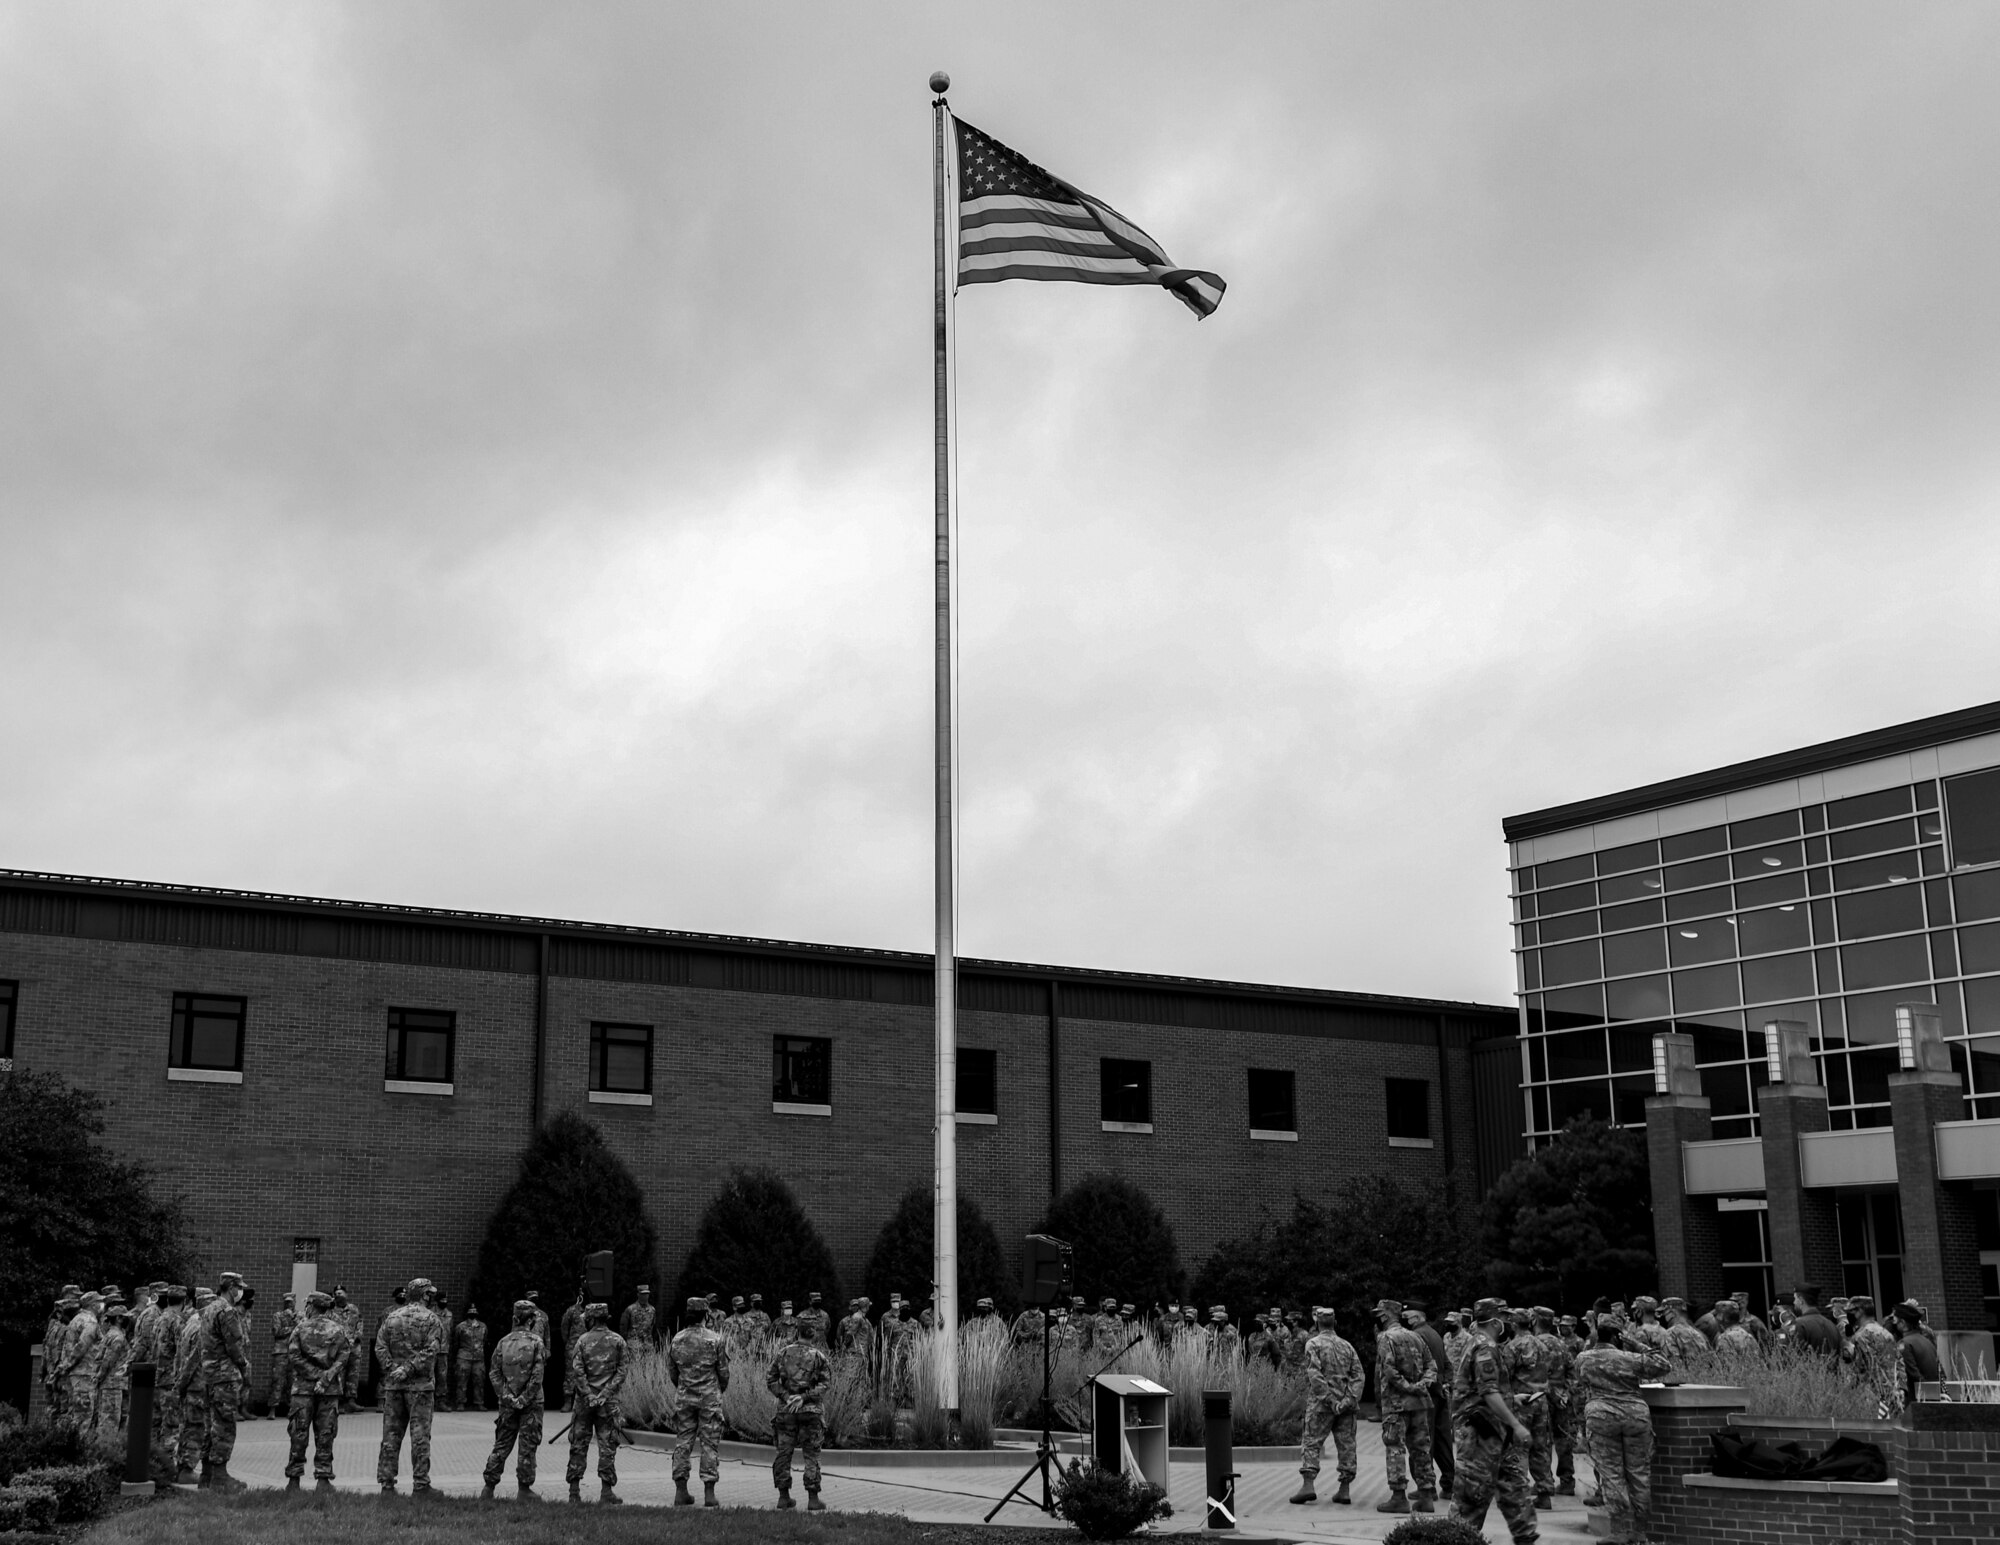 Members of the 910th Airlift Wing gather around the base flagpole on Sept. 11, 2020, for Youngstown Air Reserve Station’s 9/11 remembrance ceremony. The installation has held a ceremony every year to honor those who lost their lives on Sept. 11, 2001.